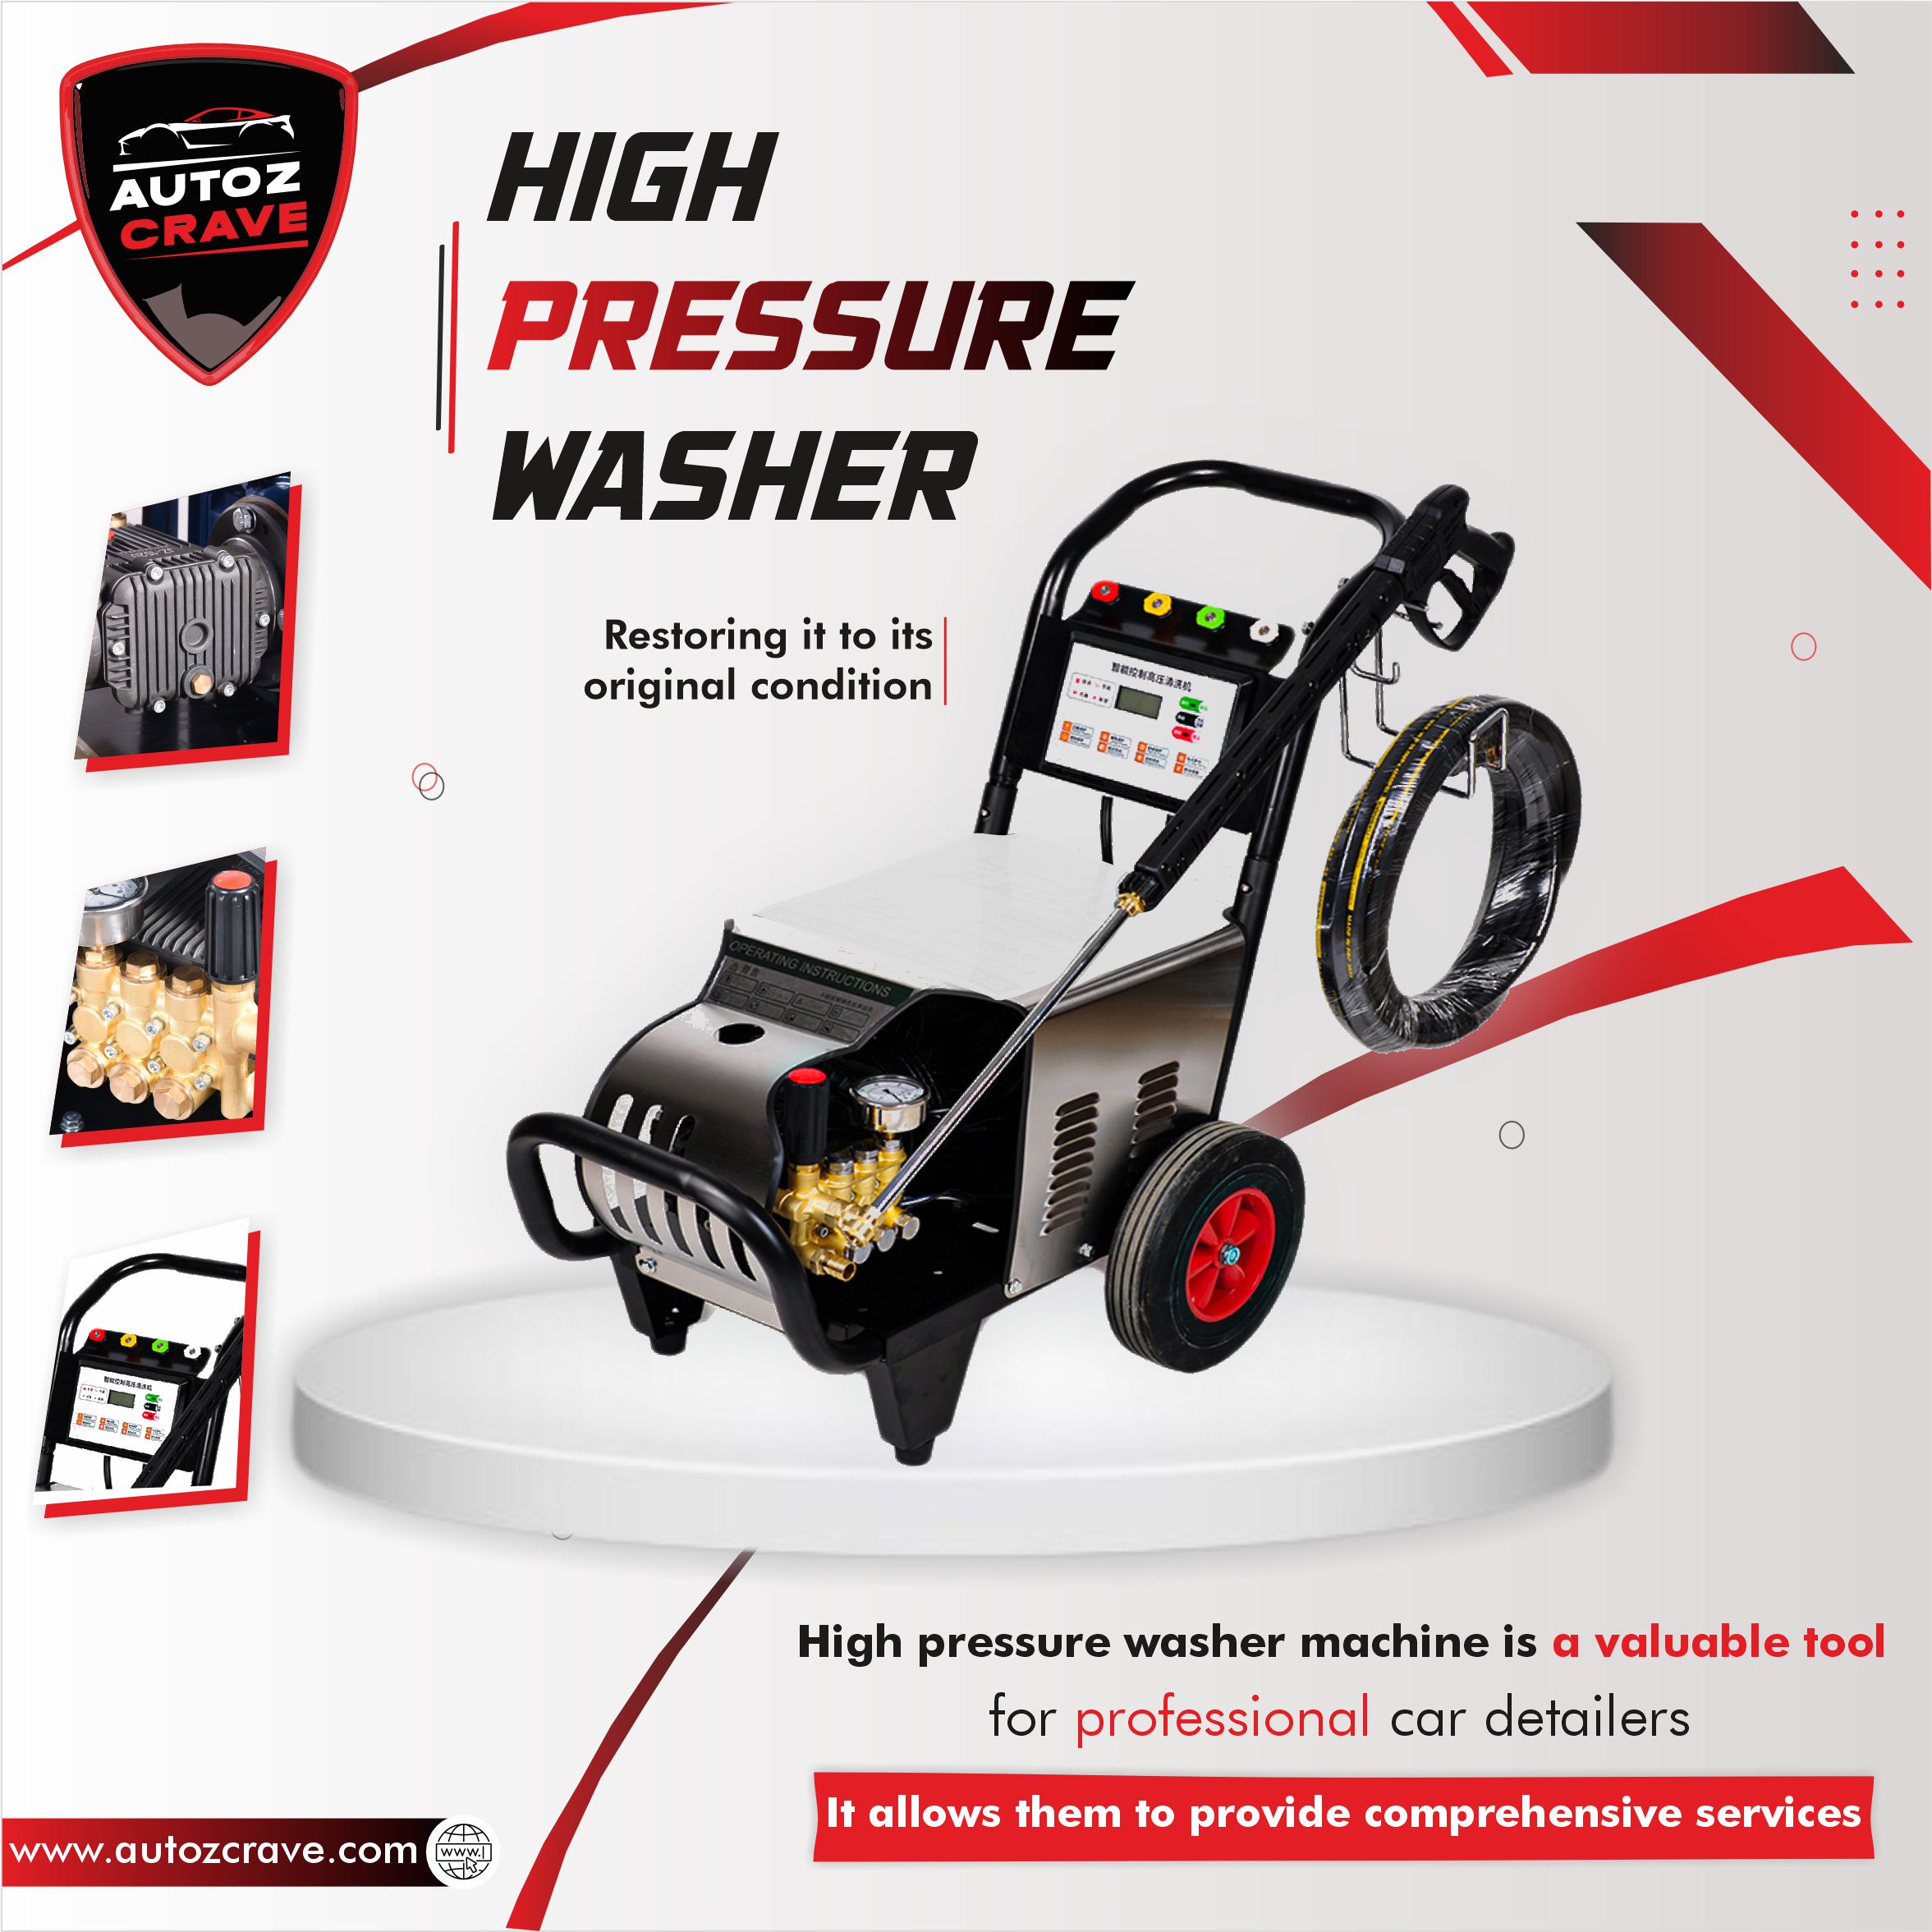 BEST HIGH PRESSURE WASHER FOR CAR WASHING